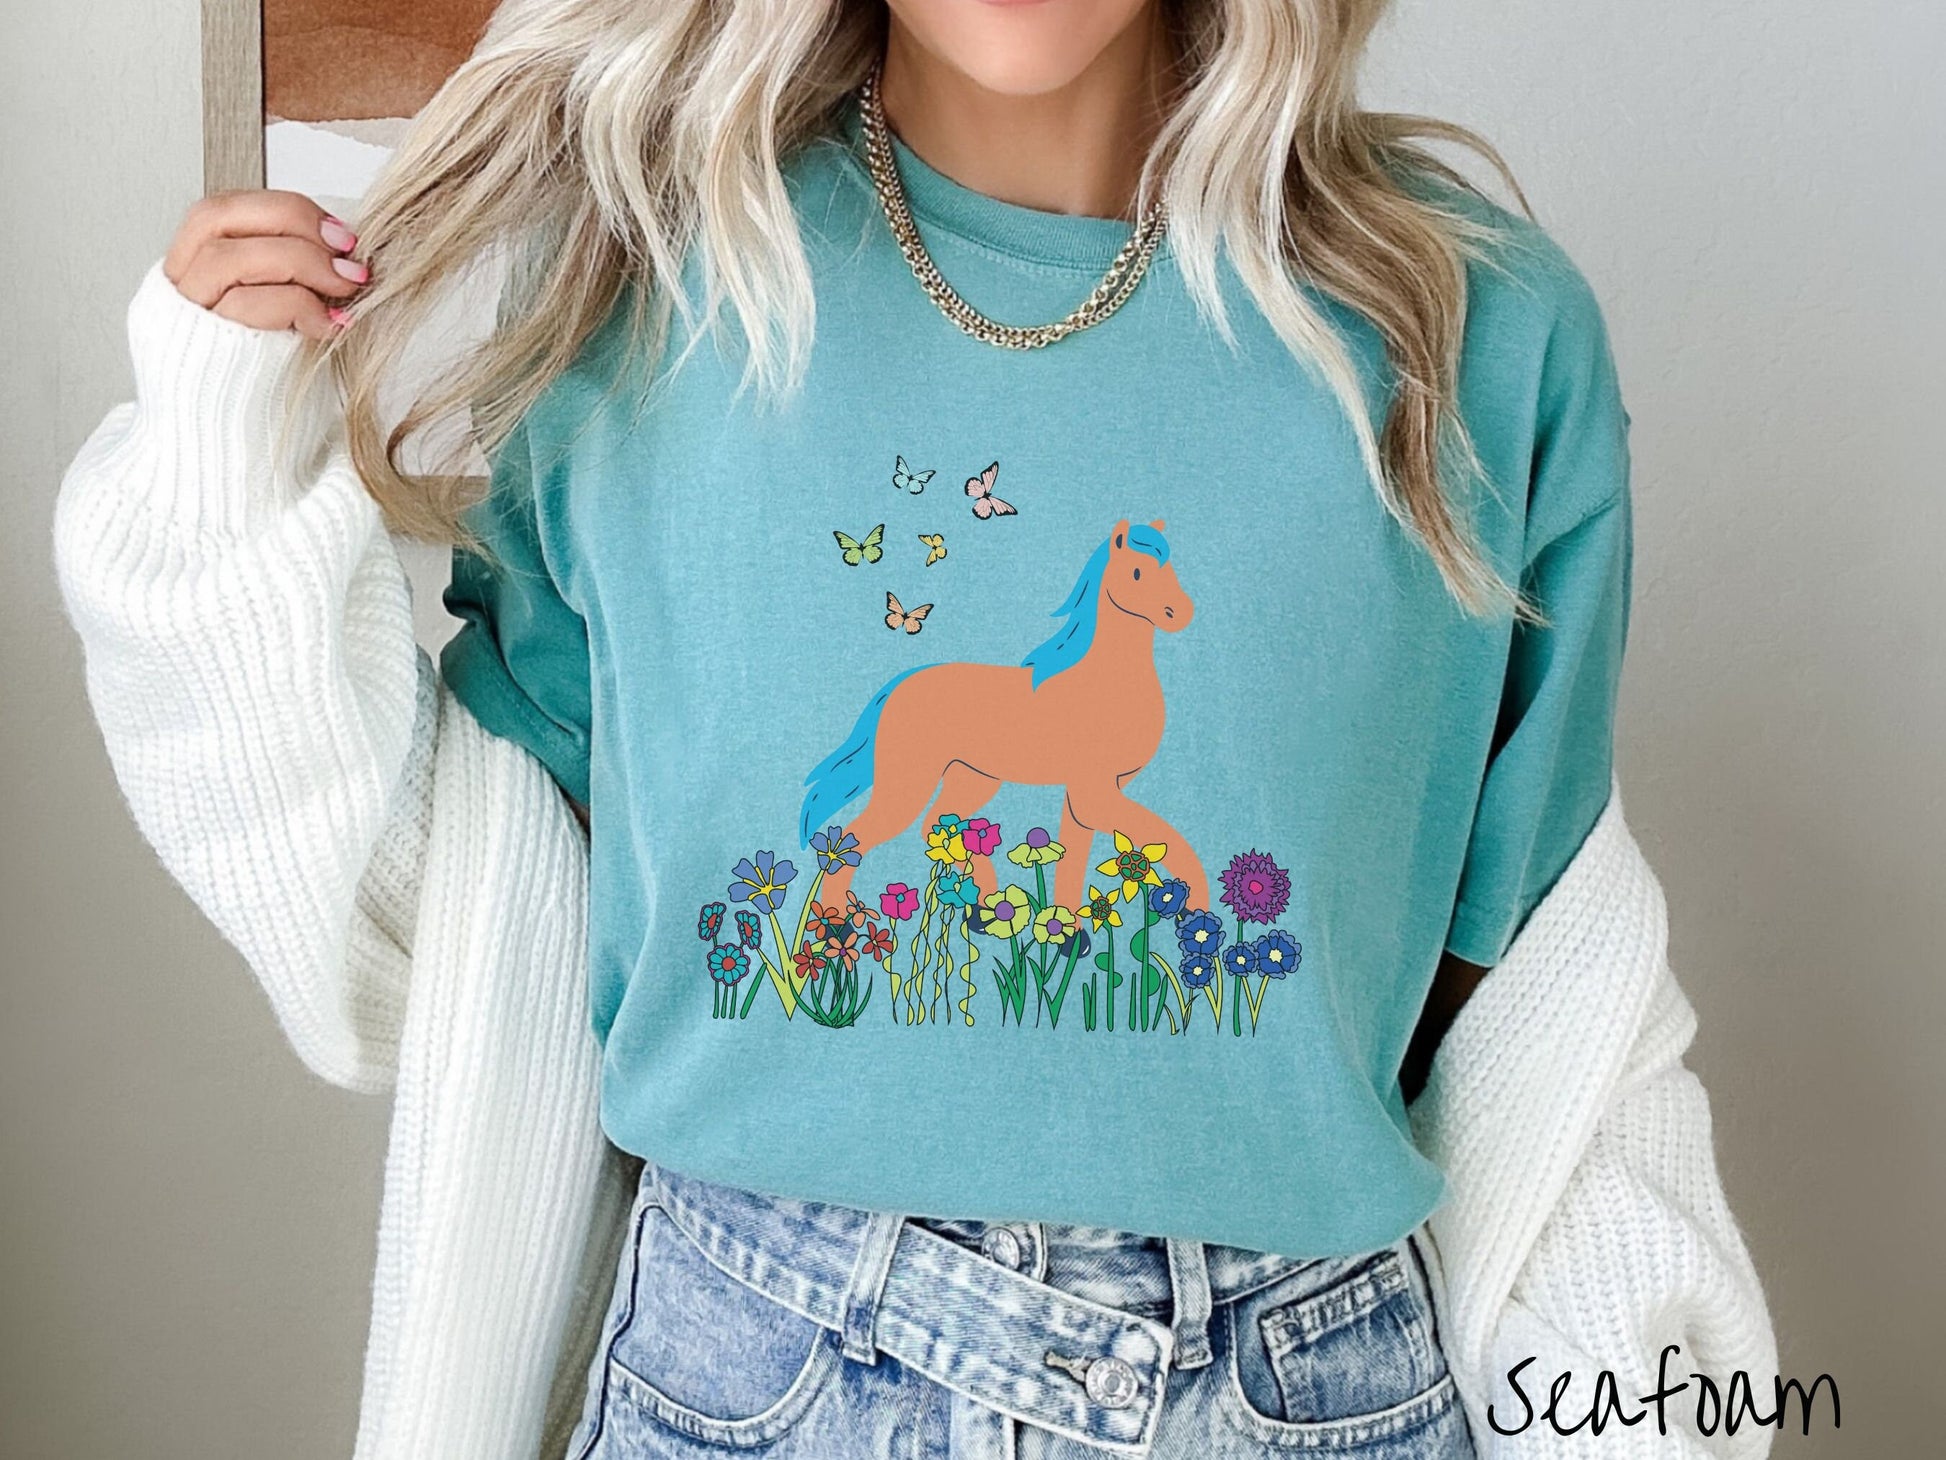 A woman wearing a cute, vintage seafoam colored Comfort Colors shirt with a brown horse with blue hair walking through a field of colorful flowers and grass. There are colorful butterflies flying above the horse.